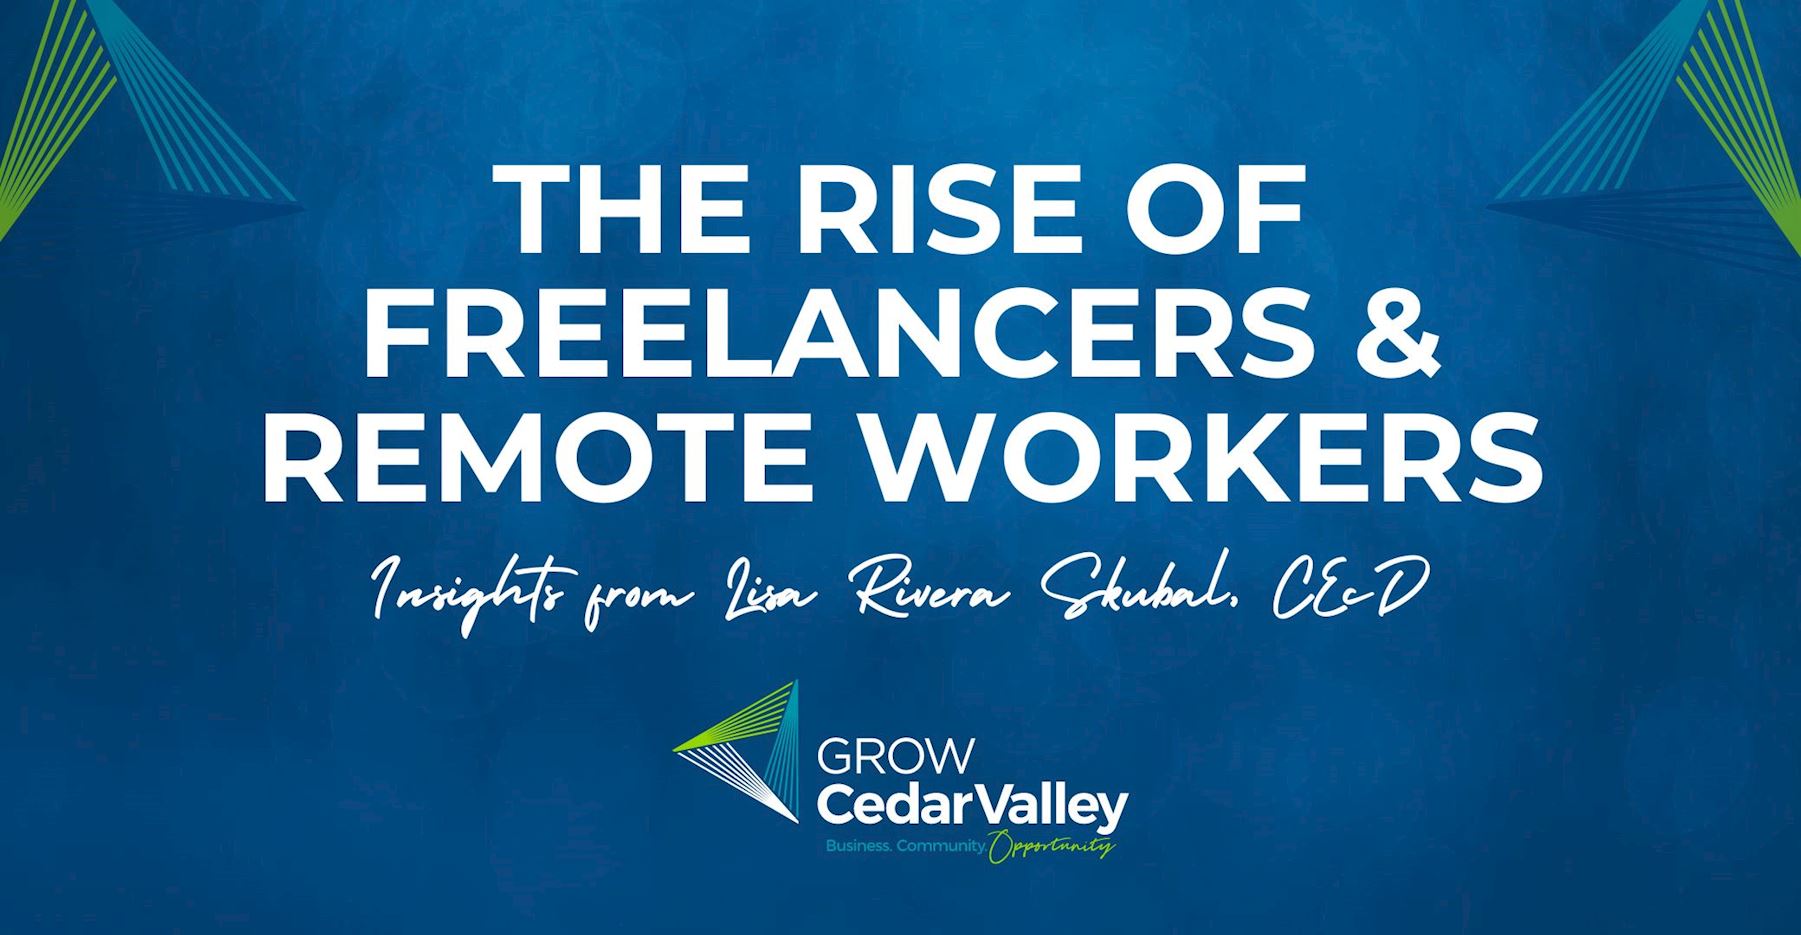 The Rise of Freelancers and Remote Workers